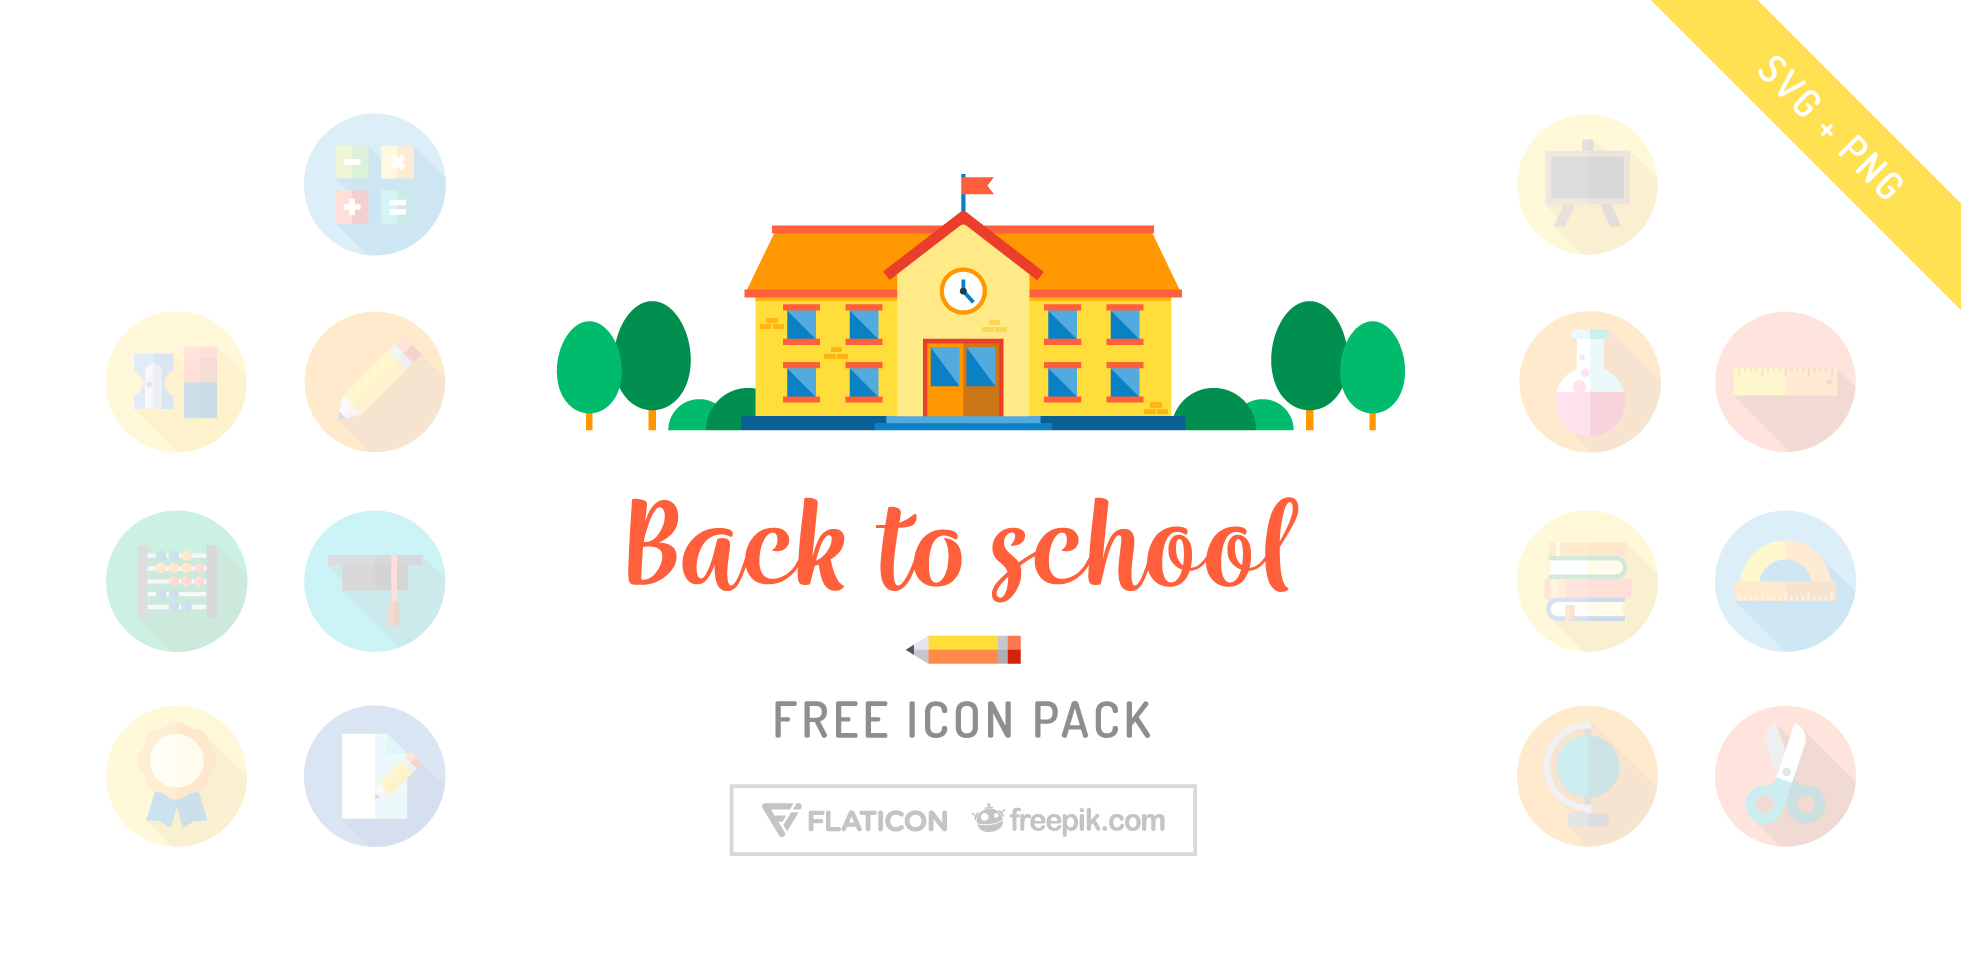 Free Download: Back to School Icons